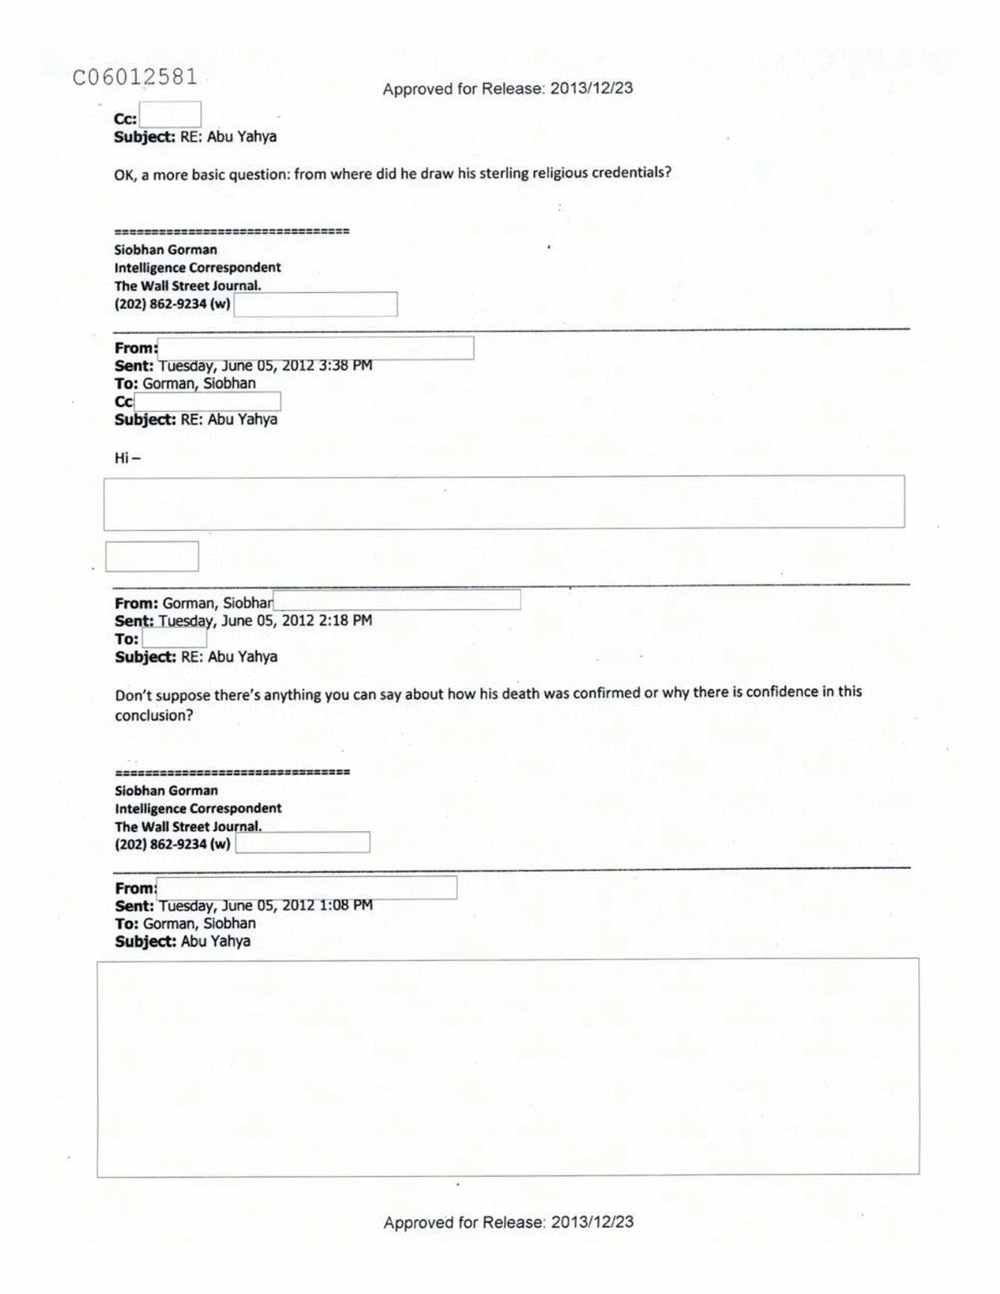 Page 121 from Email Correspondence Between Reporters and CIA Flacks